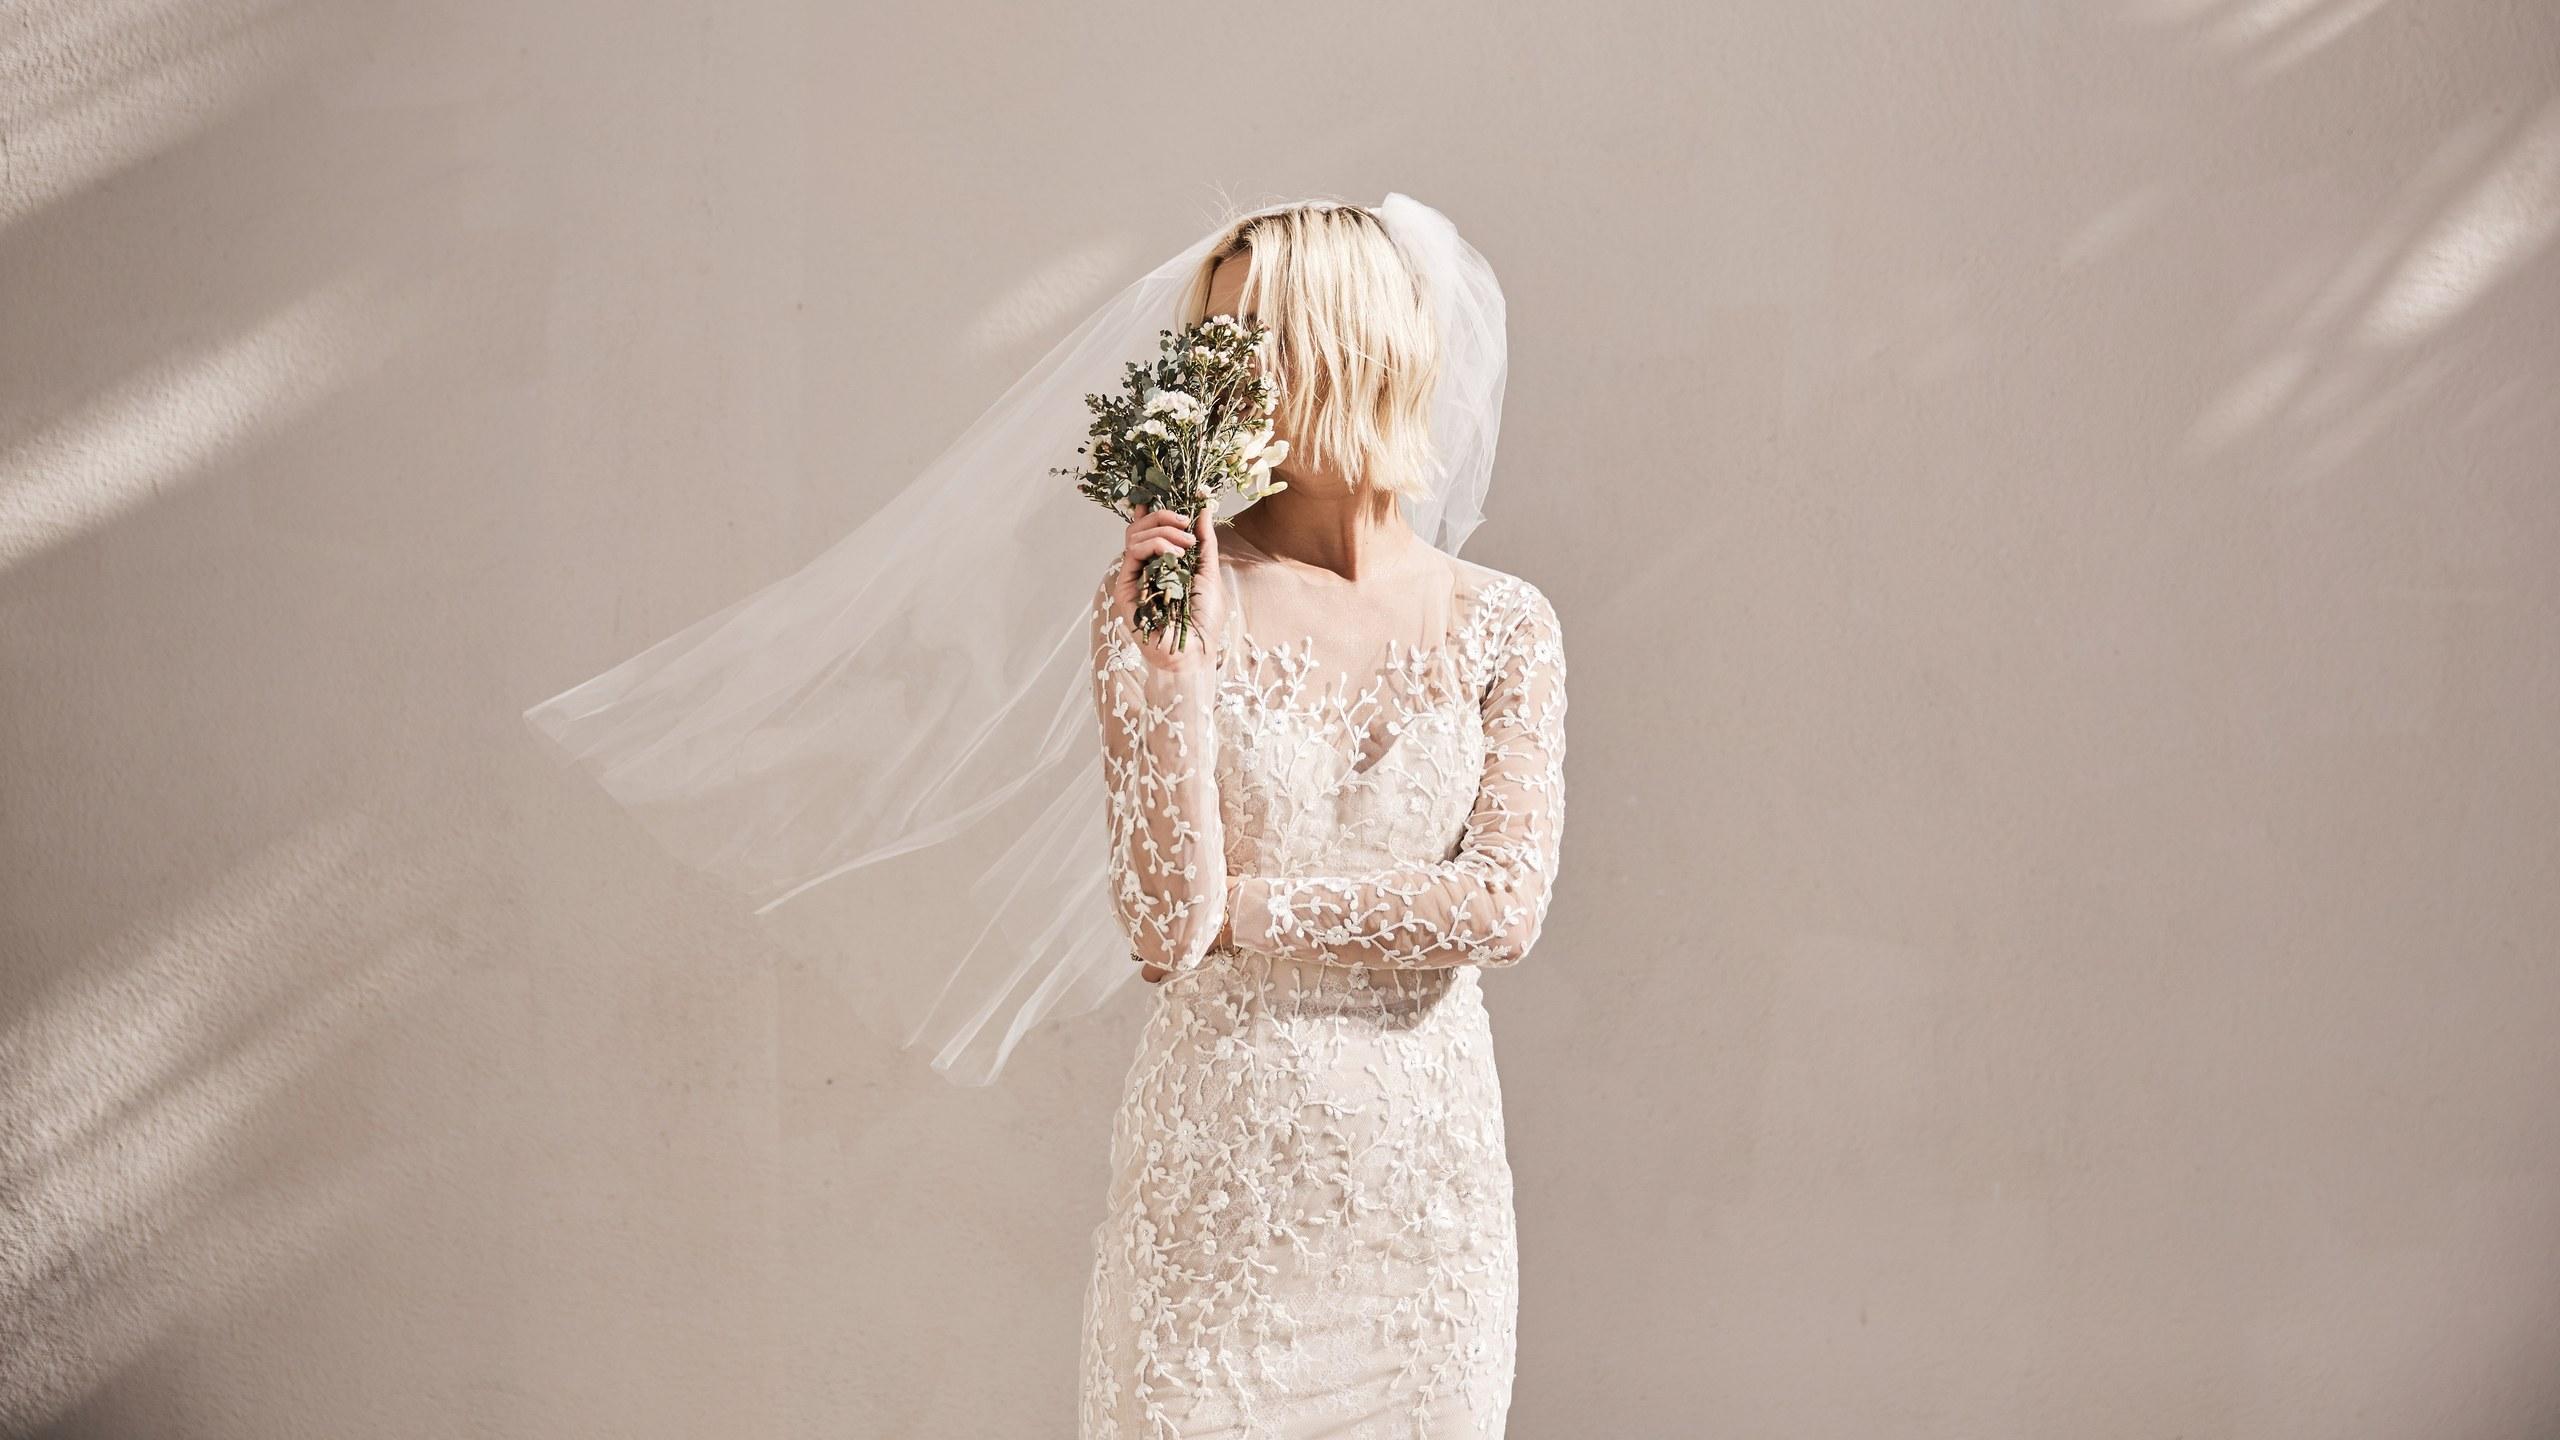 The 21 Best Places to Shop for Affordable Wedding Dresses